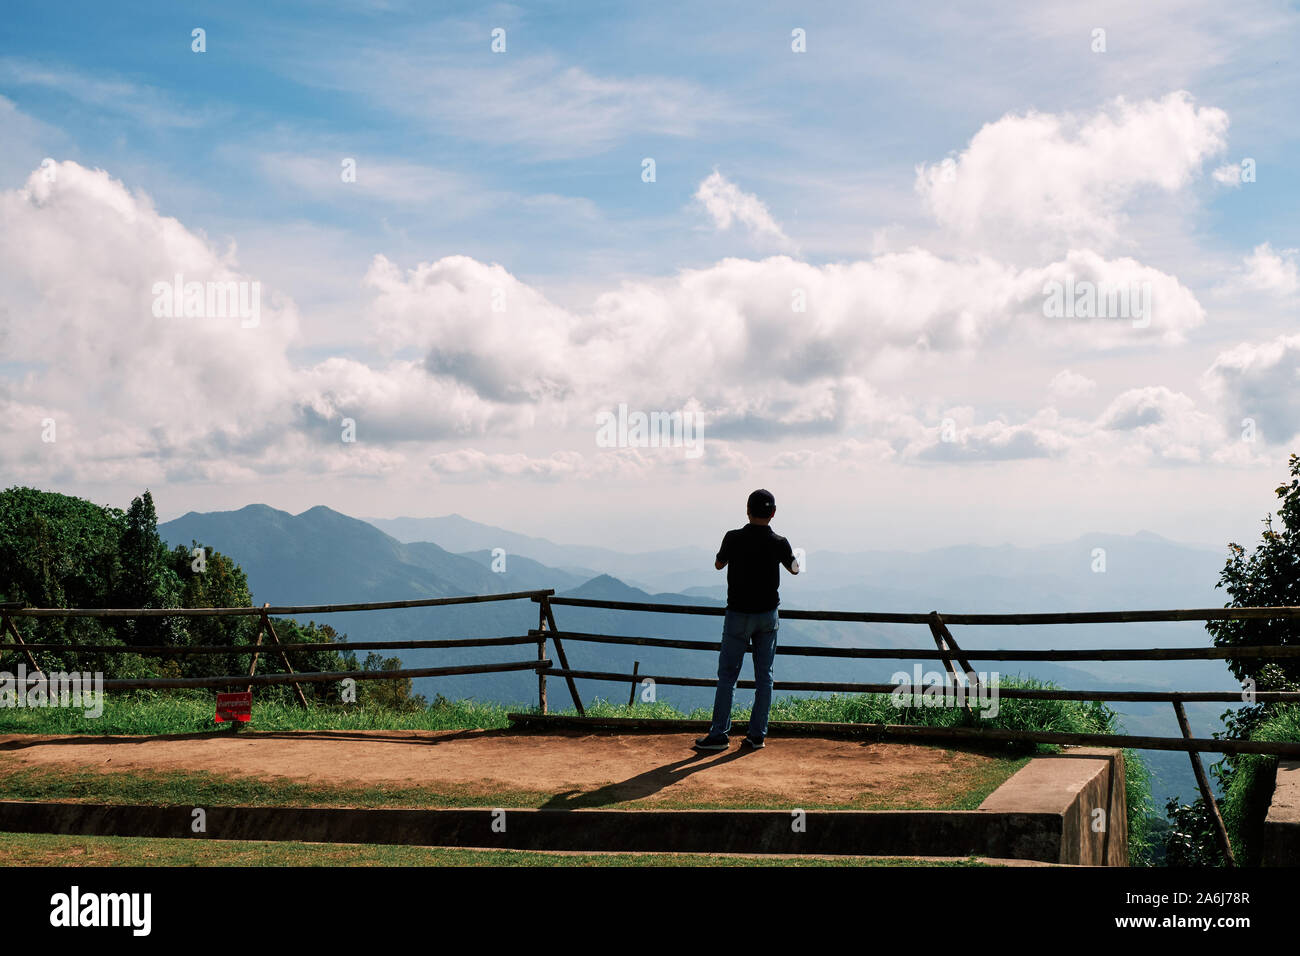 A lone photographer takes in the view of the mountainous landscape at Doi Inthanon National Park, Chiang Mai, Thailand. Stock Photo